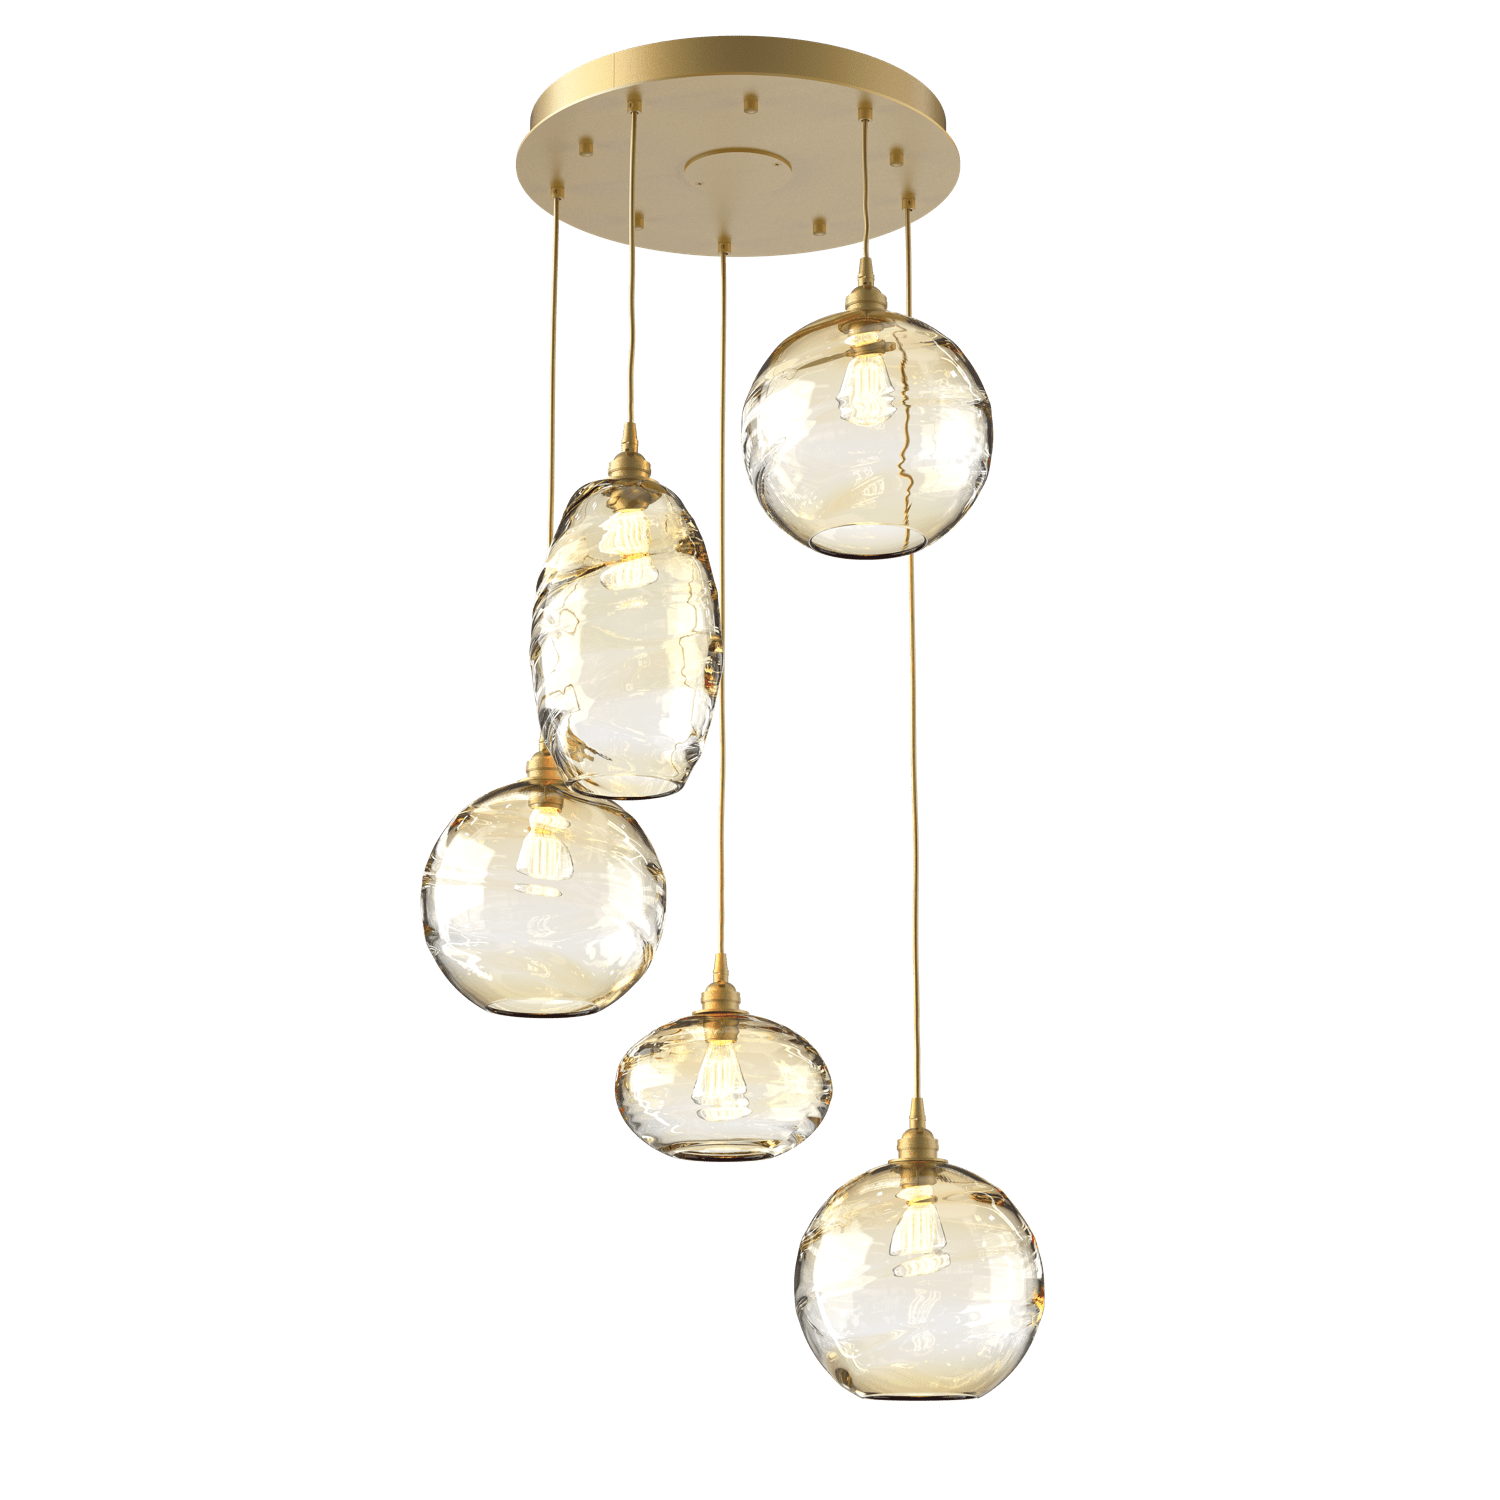 CHB0048-05-GB-OA-Hammerton-Studio-Optic-Blown-Glass-Misto-5-light-round-pendant-chandelier-with-gilded-brass-finish-and-optic-amber-blown-glass-shades-and-incandescent-lamping